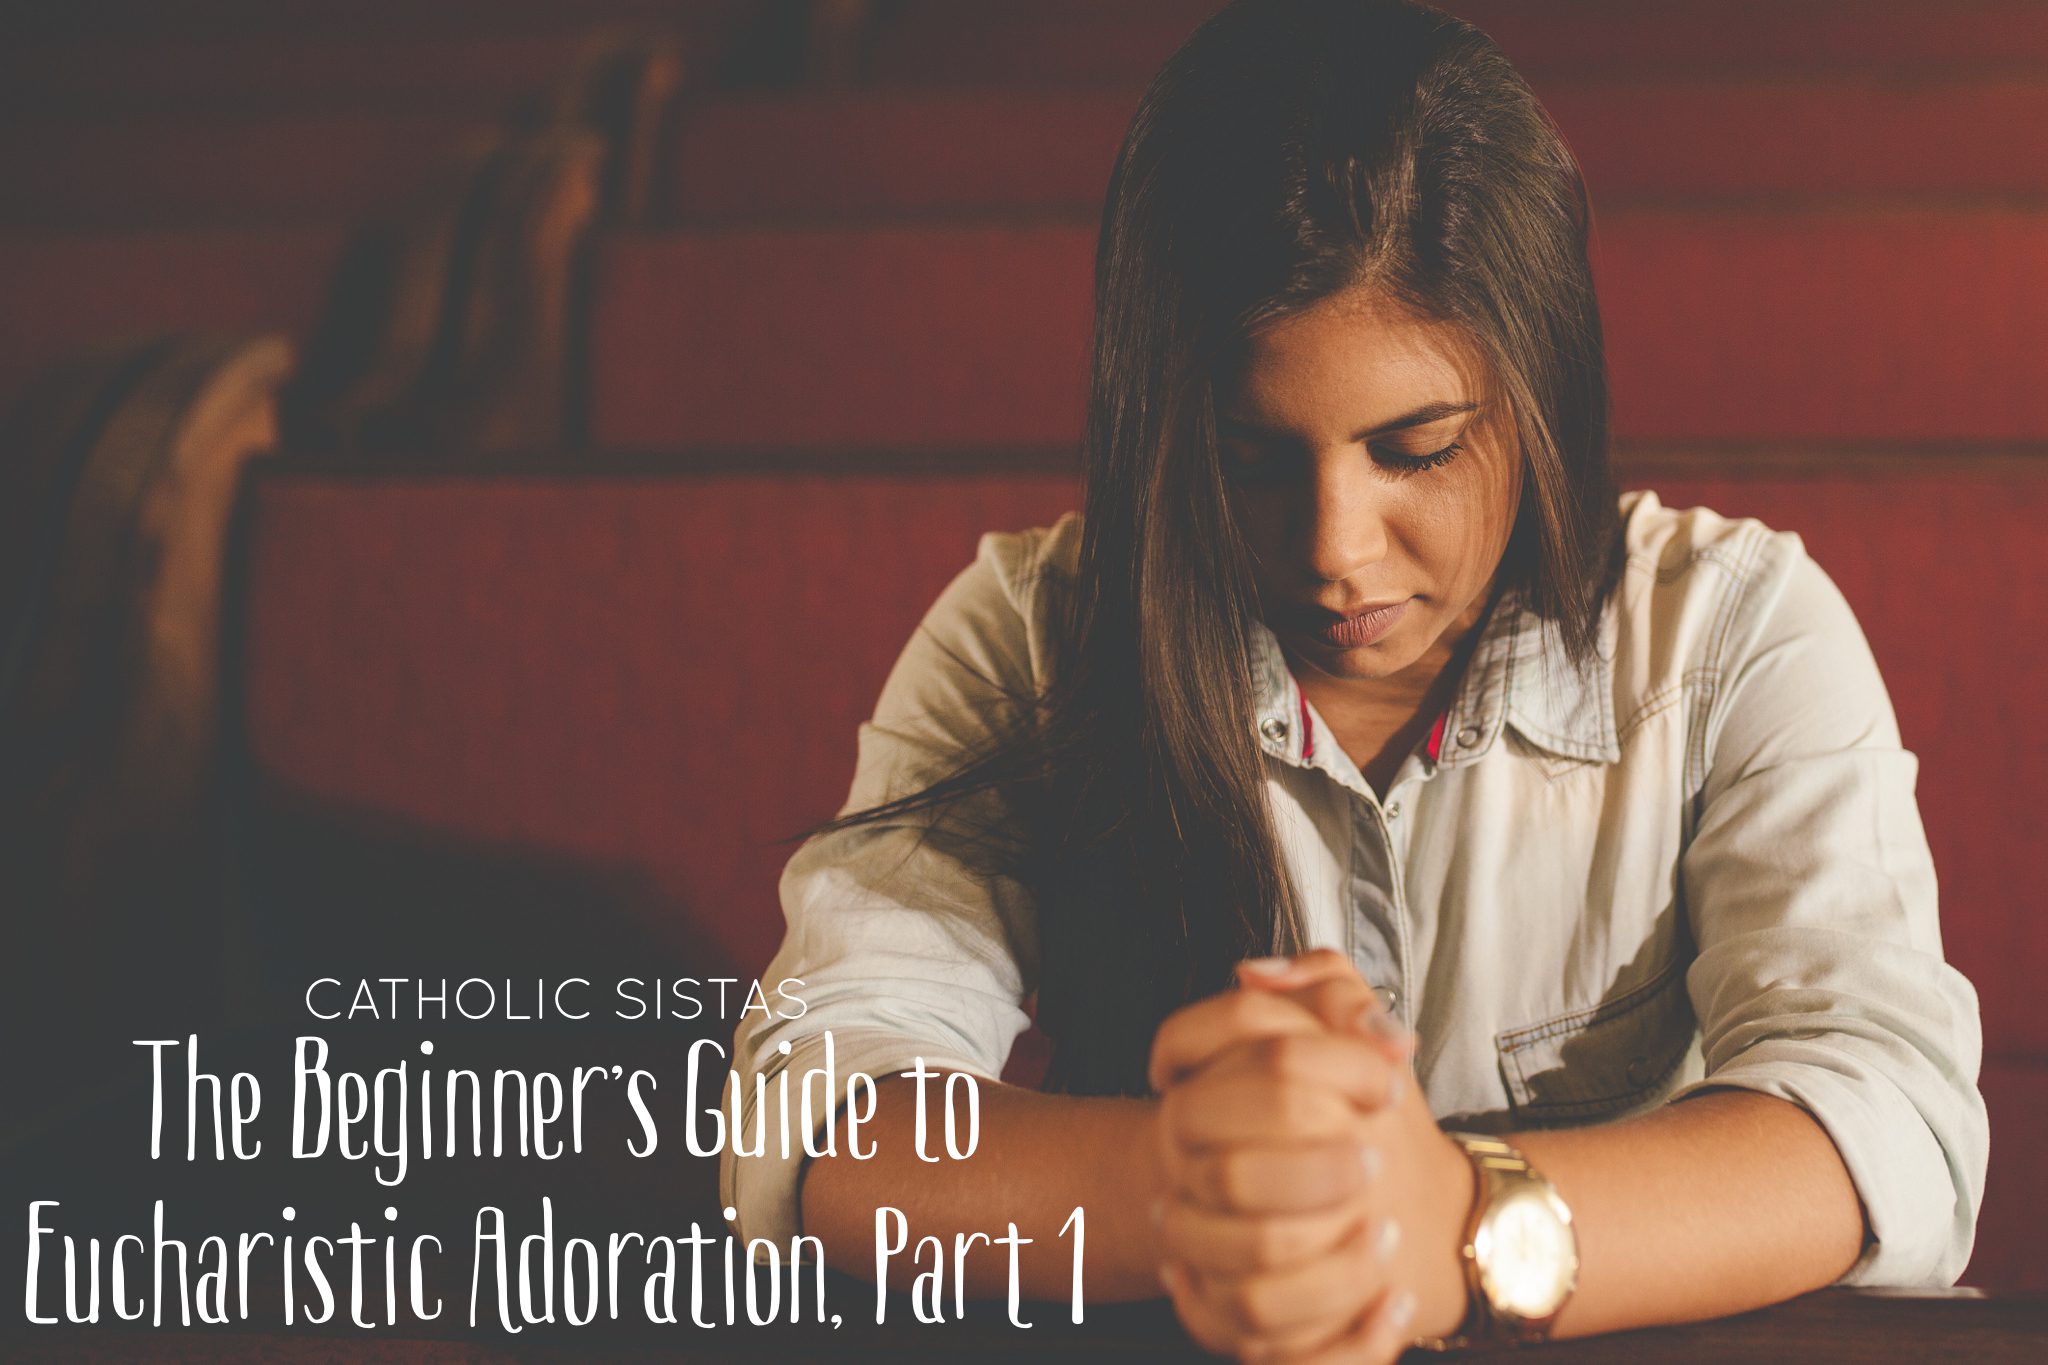 The Beginner's Guide to Eucharistic Adoration, Part 1